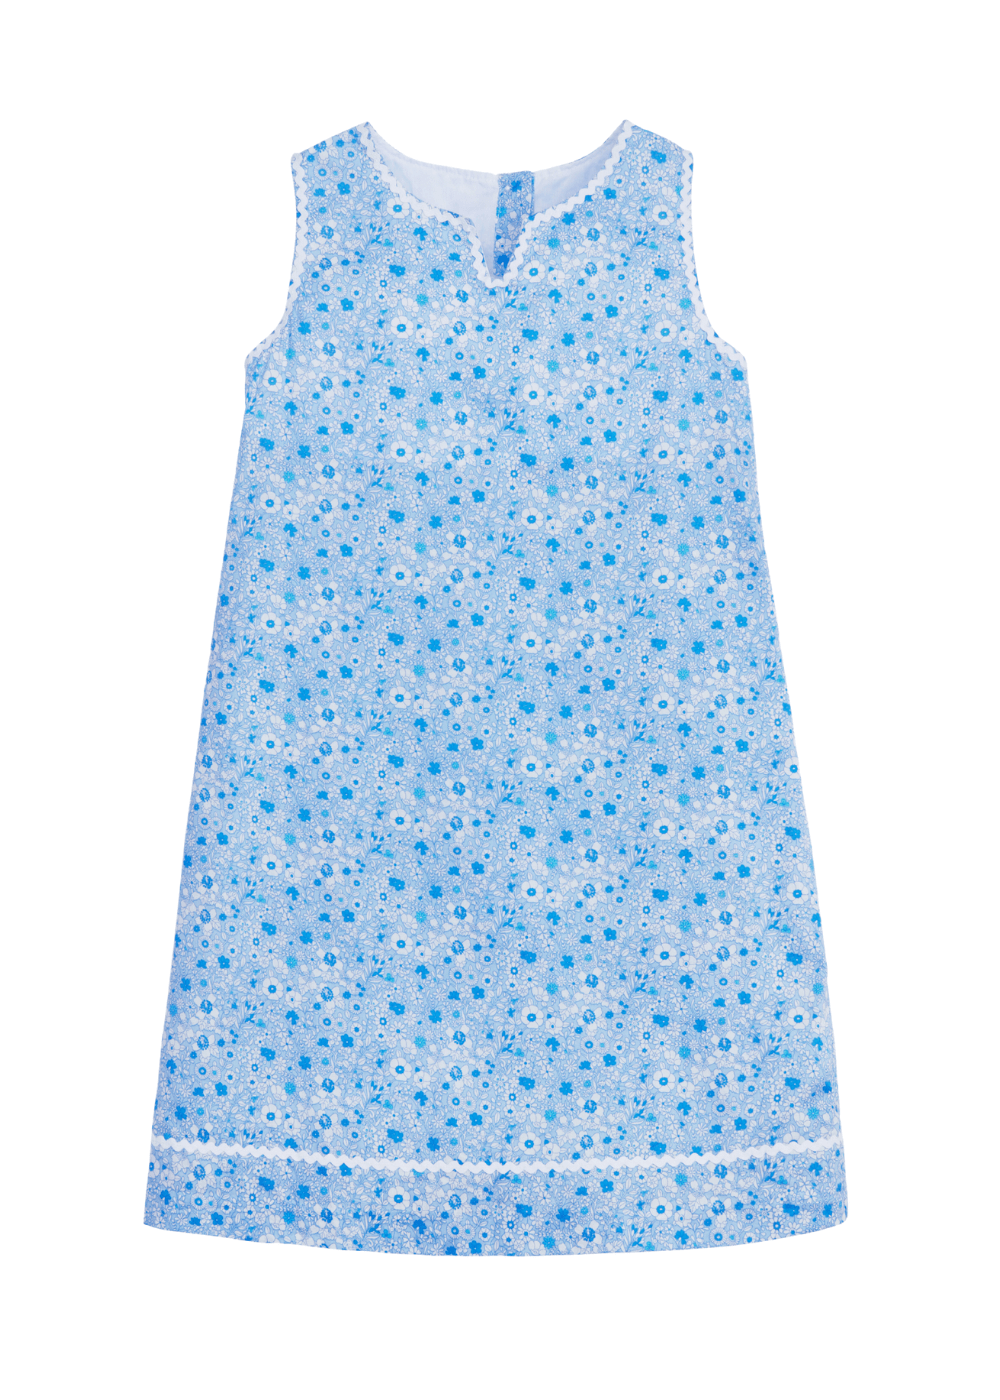 classic childrens clothing girls shift dress in blue floral pattern